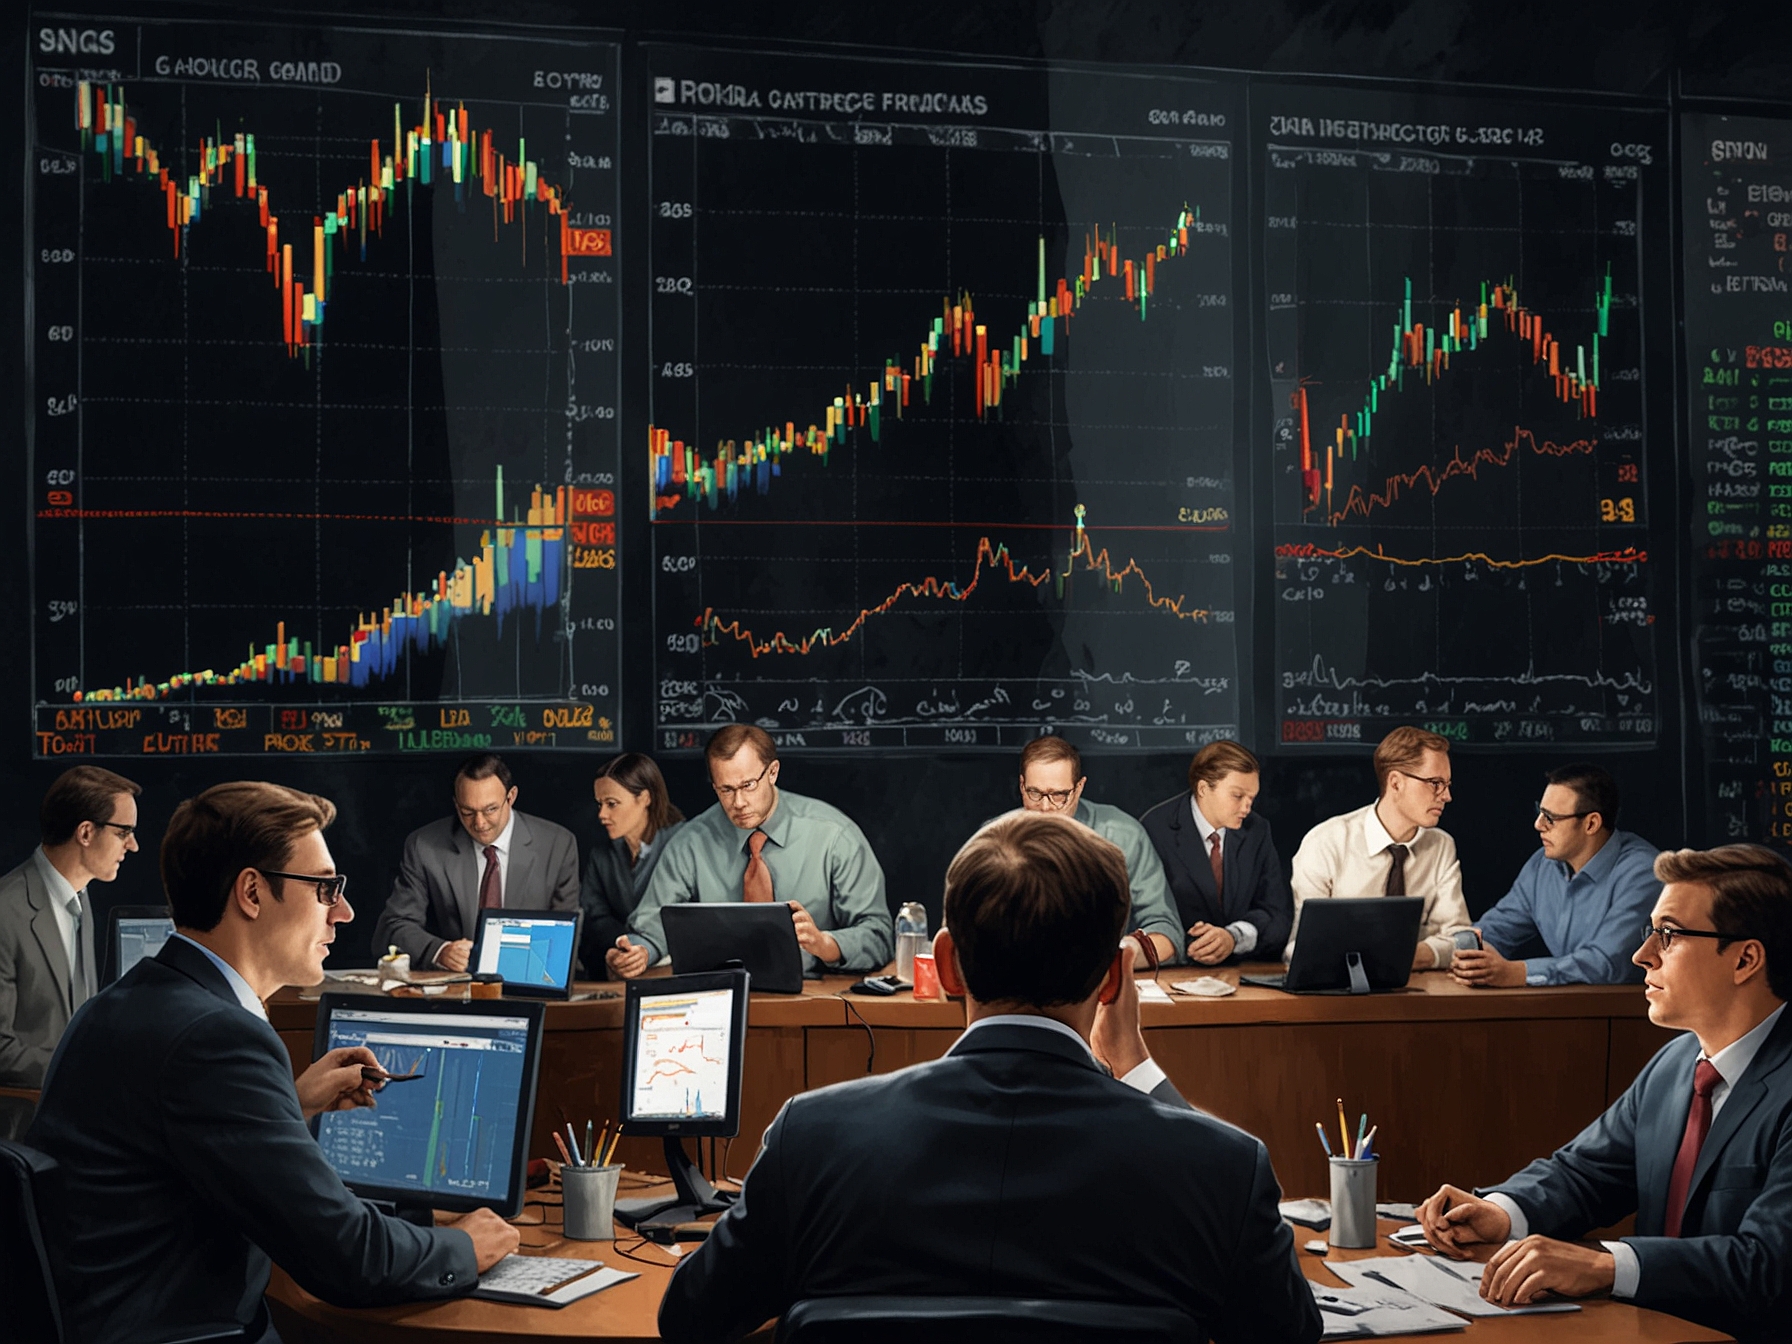 A depiction of investors and traders around a screen showing soaring stock prices, highlighting the role of speculative trading and herd behavior in forming a potential stock bubble.